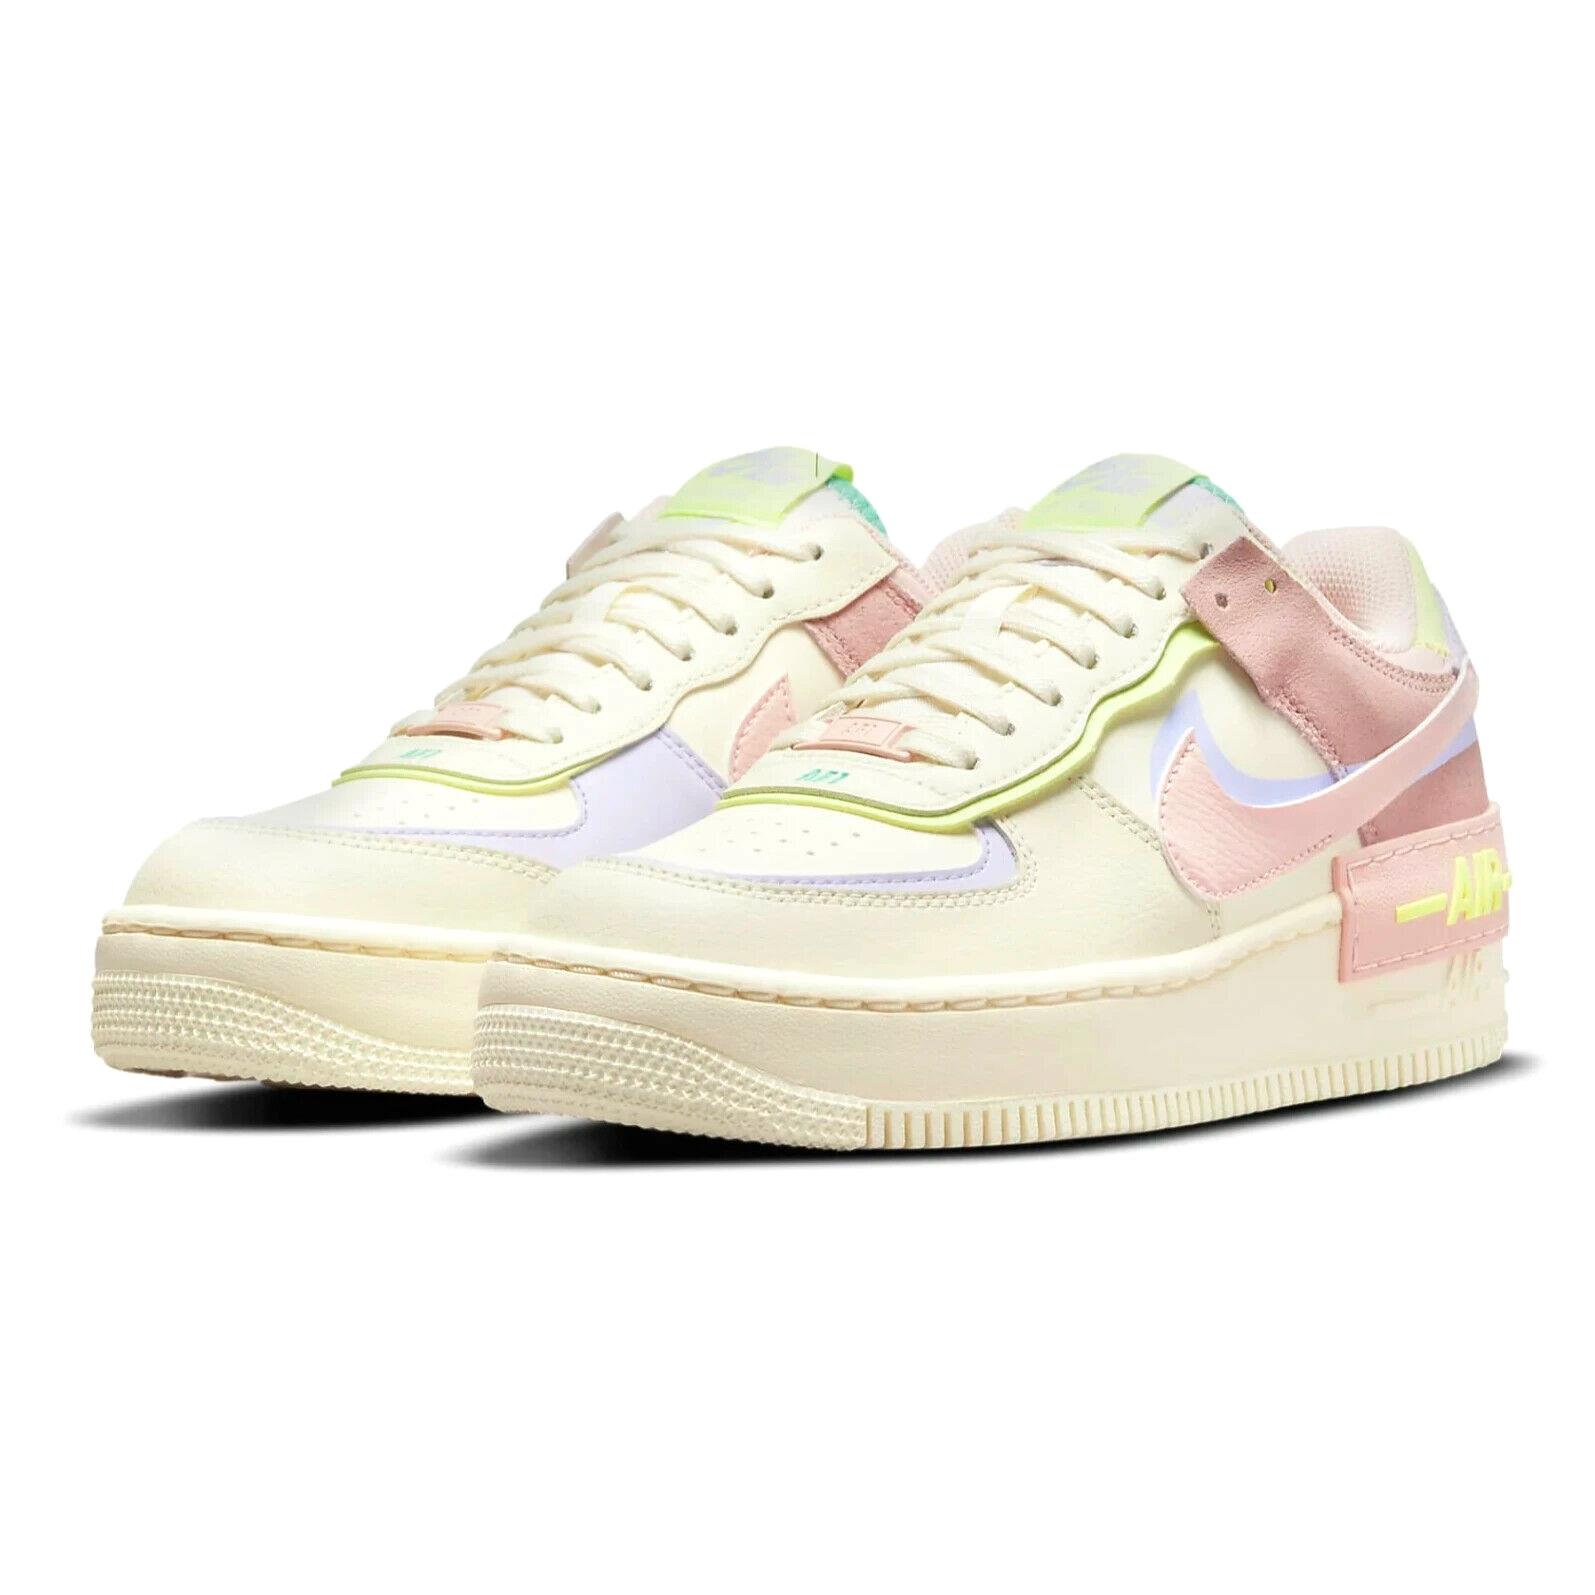 Nike AF1 Shadow Womens Size 11.5 Sneaker Shoes ci0919 700 Cashmere Air Force 1 - Multicolor